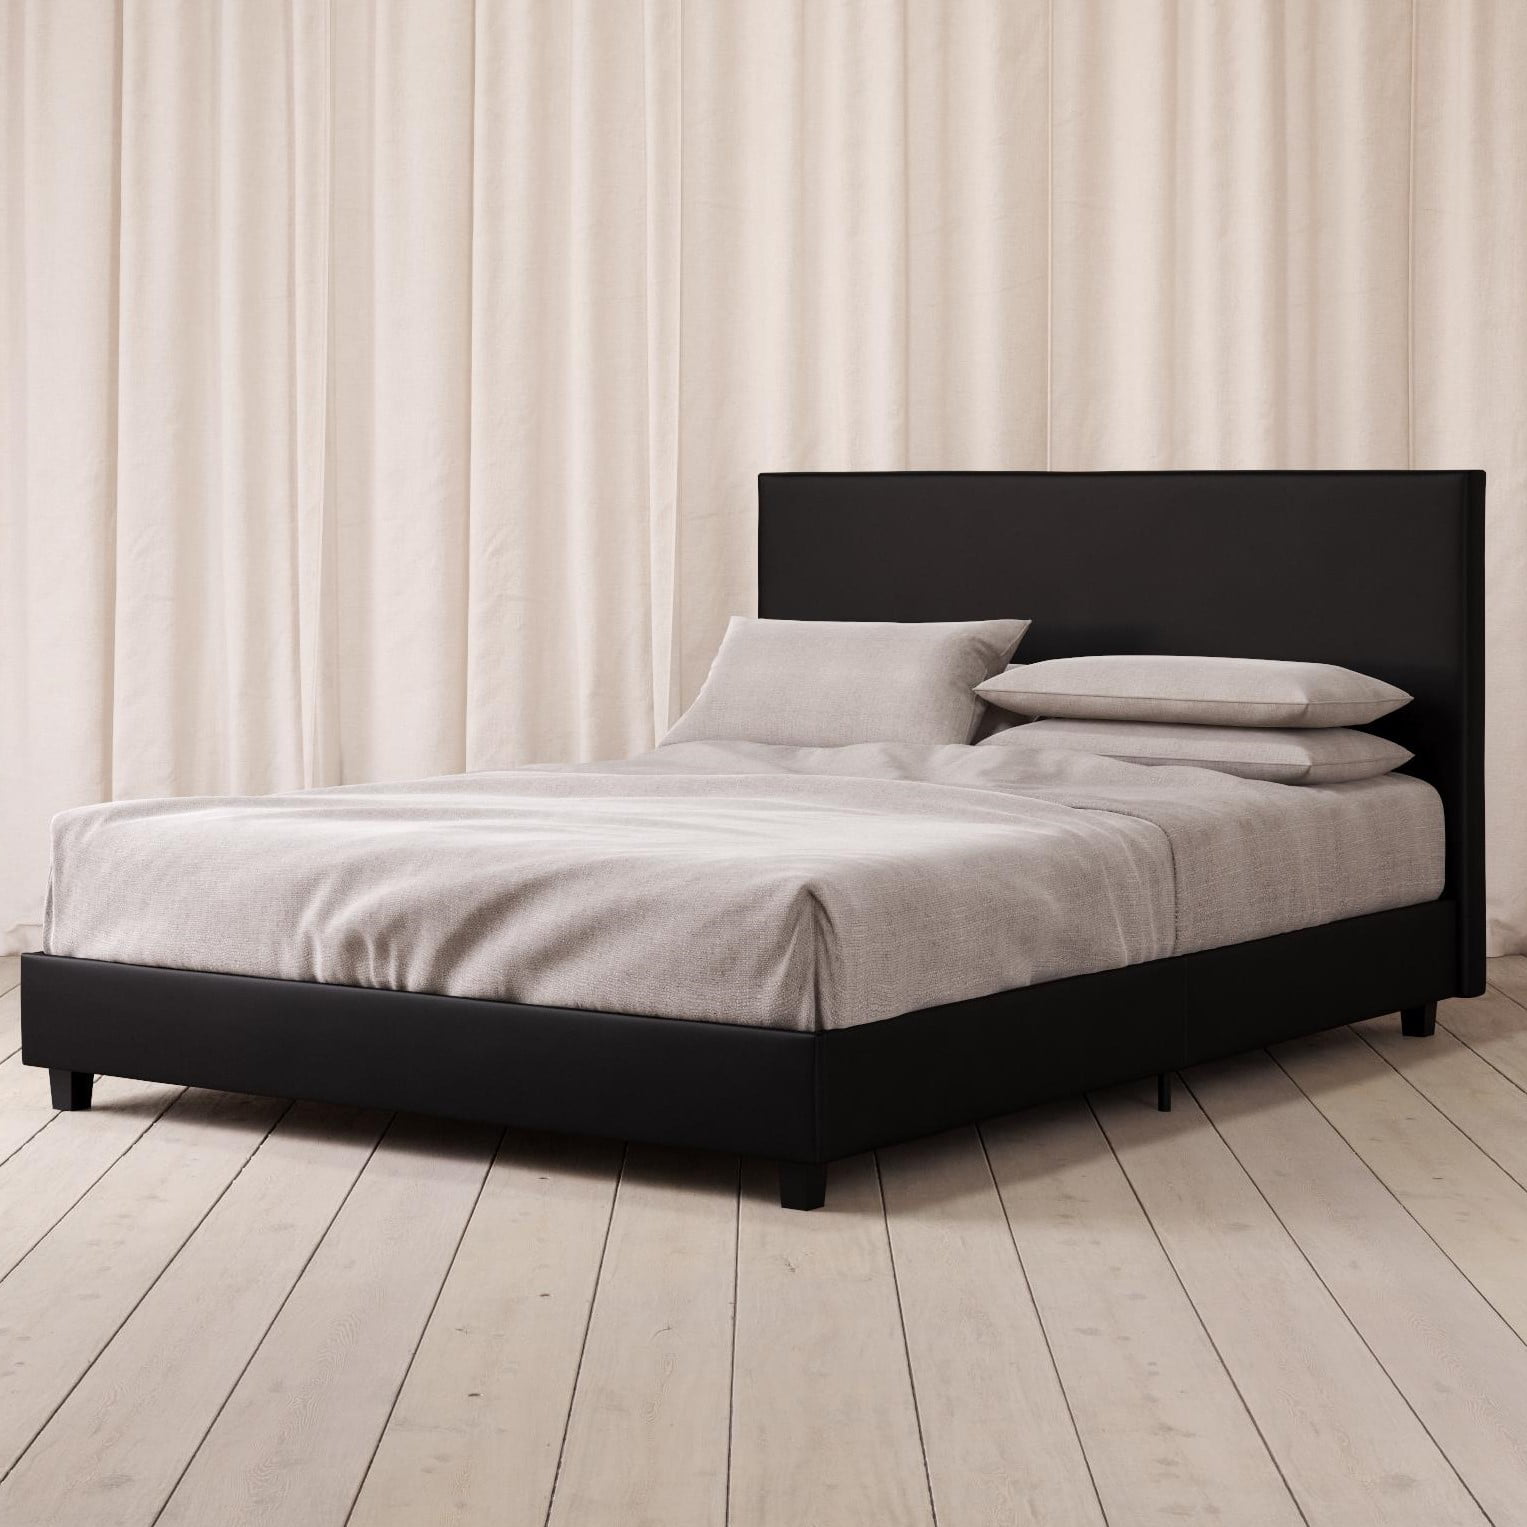 Mainstays Upholstered Bed Queen Bed Frame Black Faux Leather